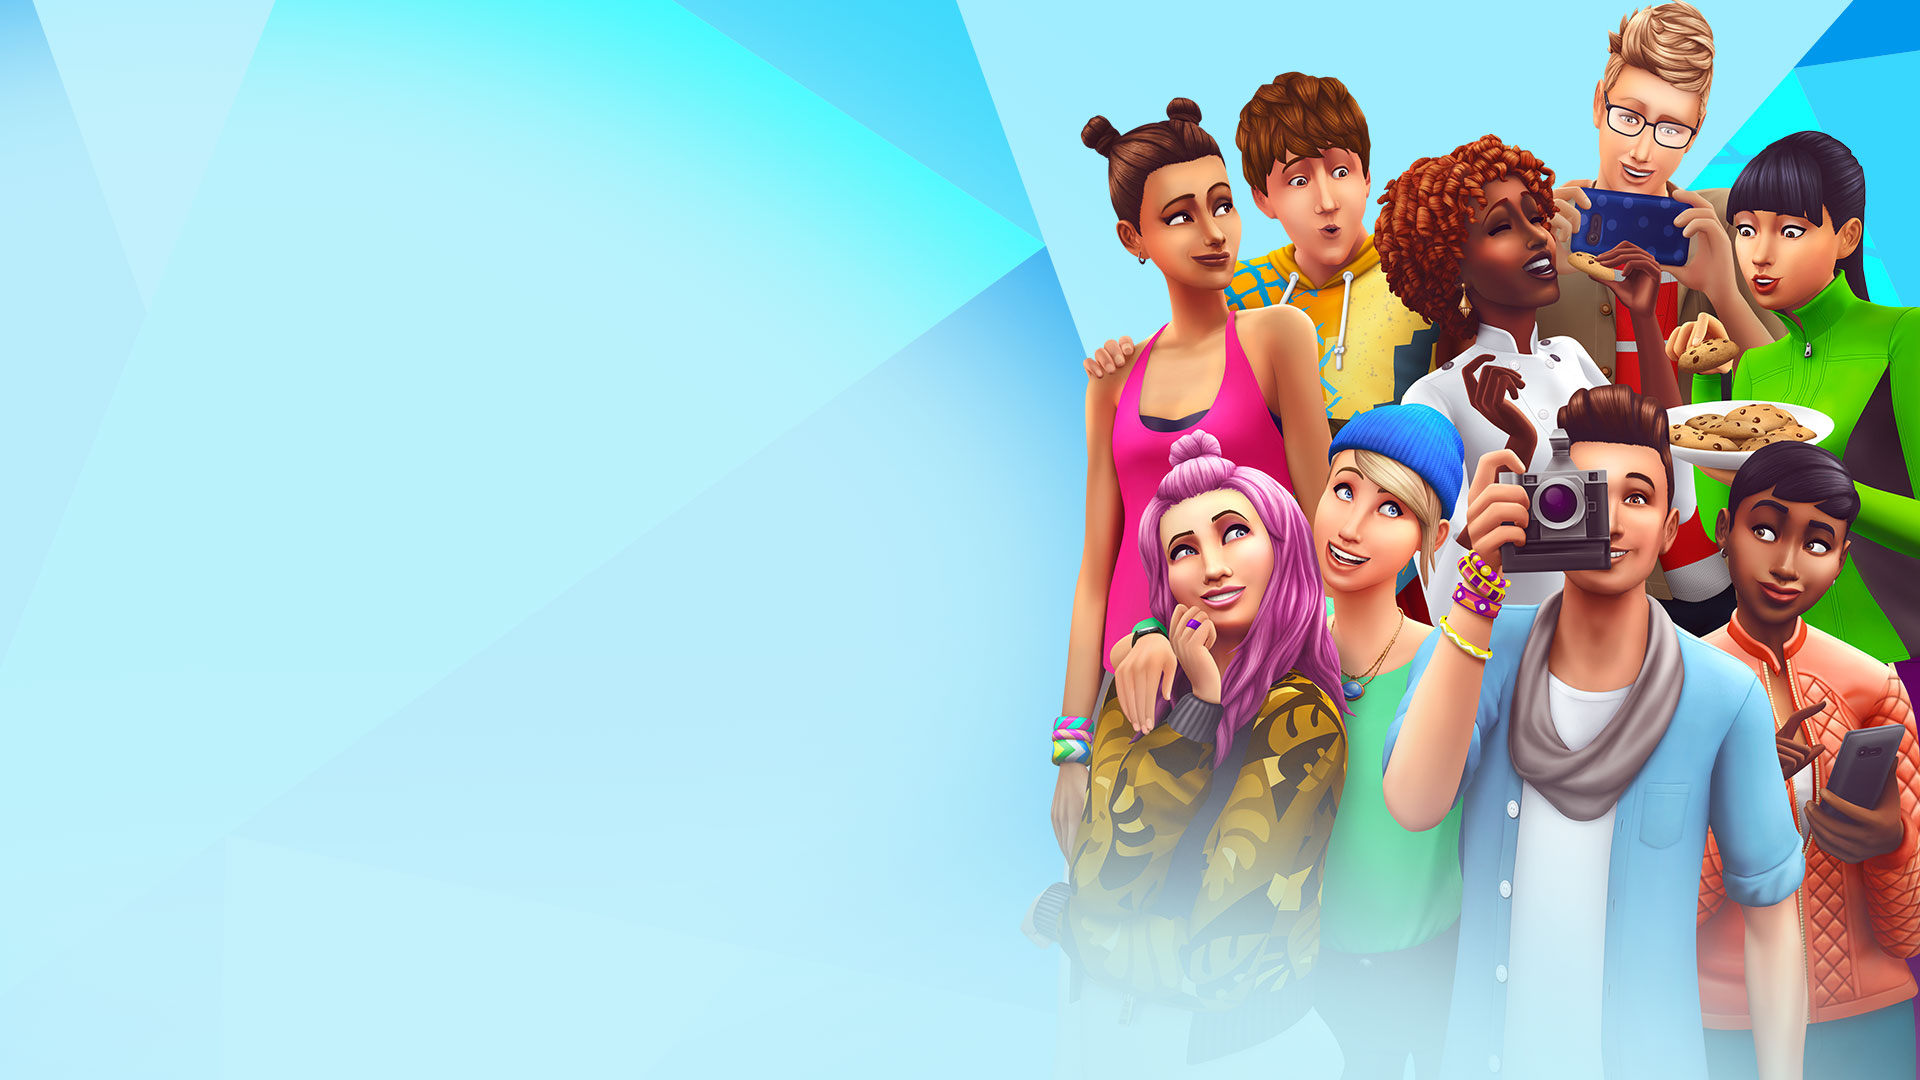 Collage of The Sims 4 characters